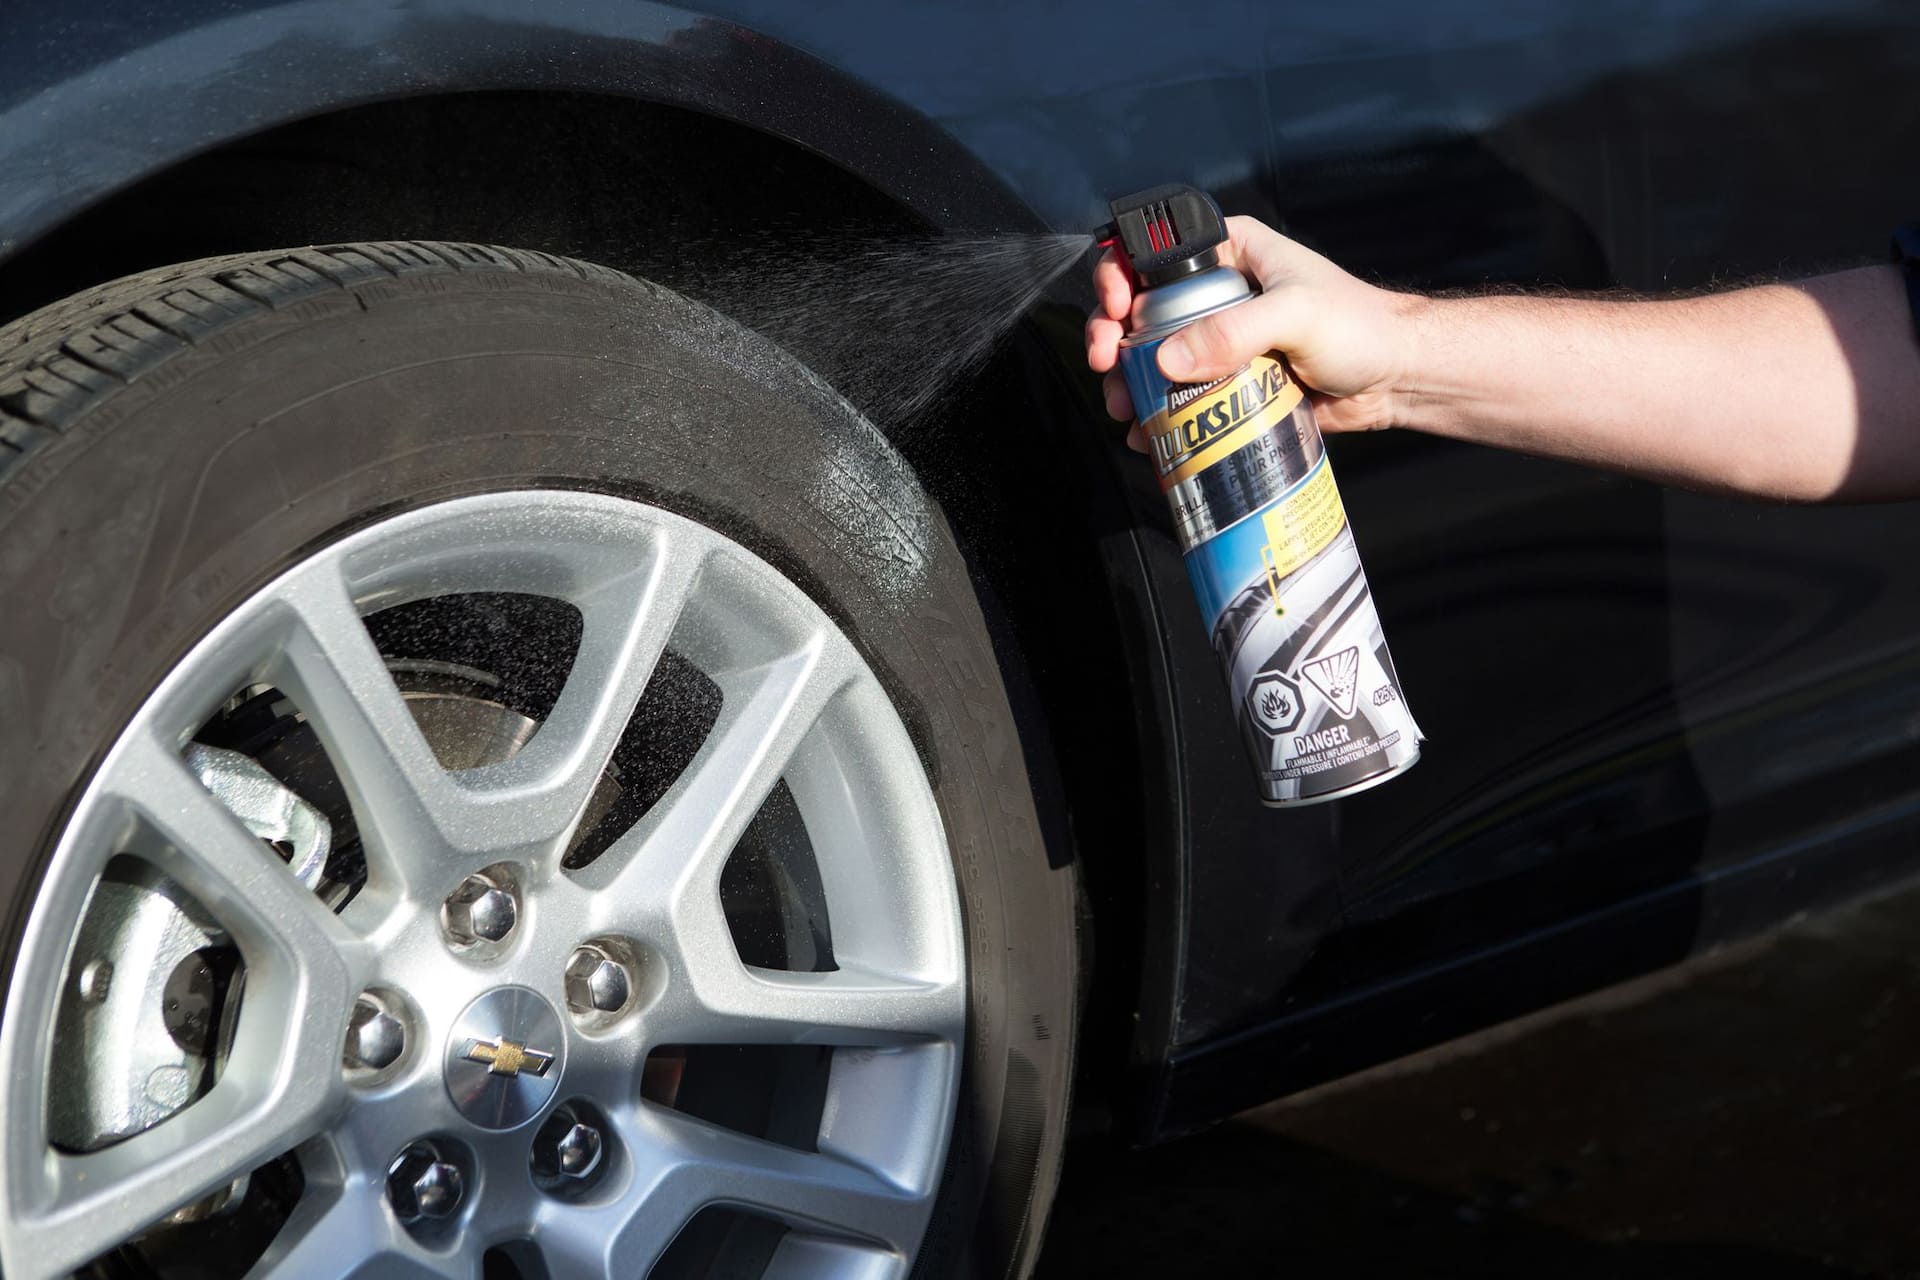 Armor All Quicksilver Wheel and Tire Cleaner 20 Oz Aerosol Can